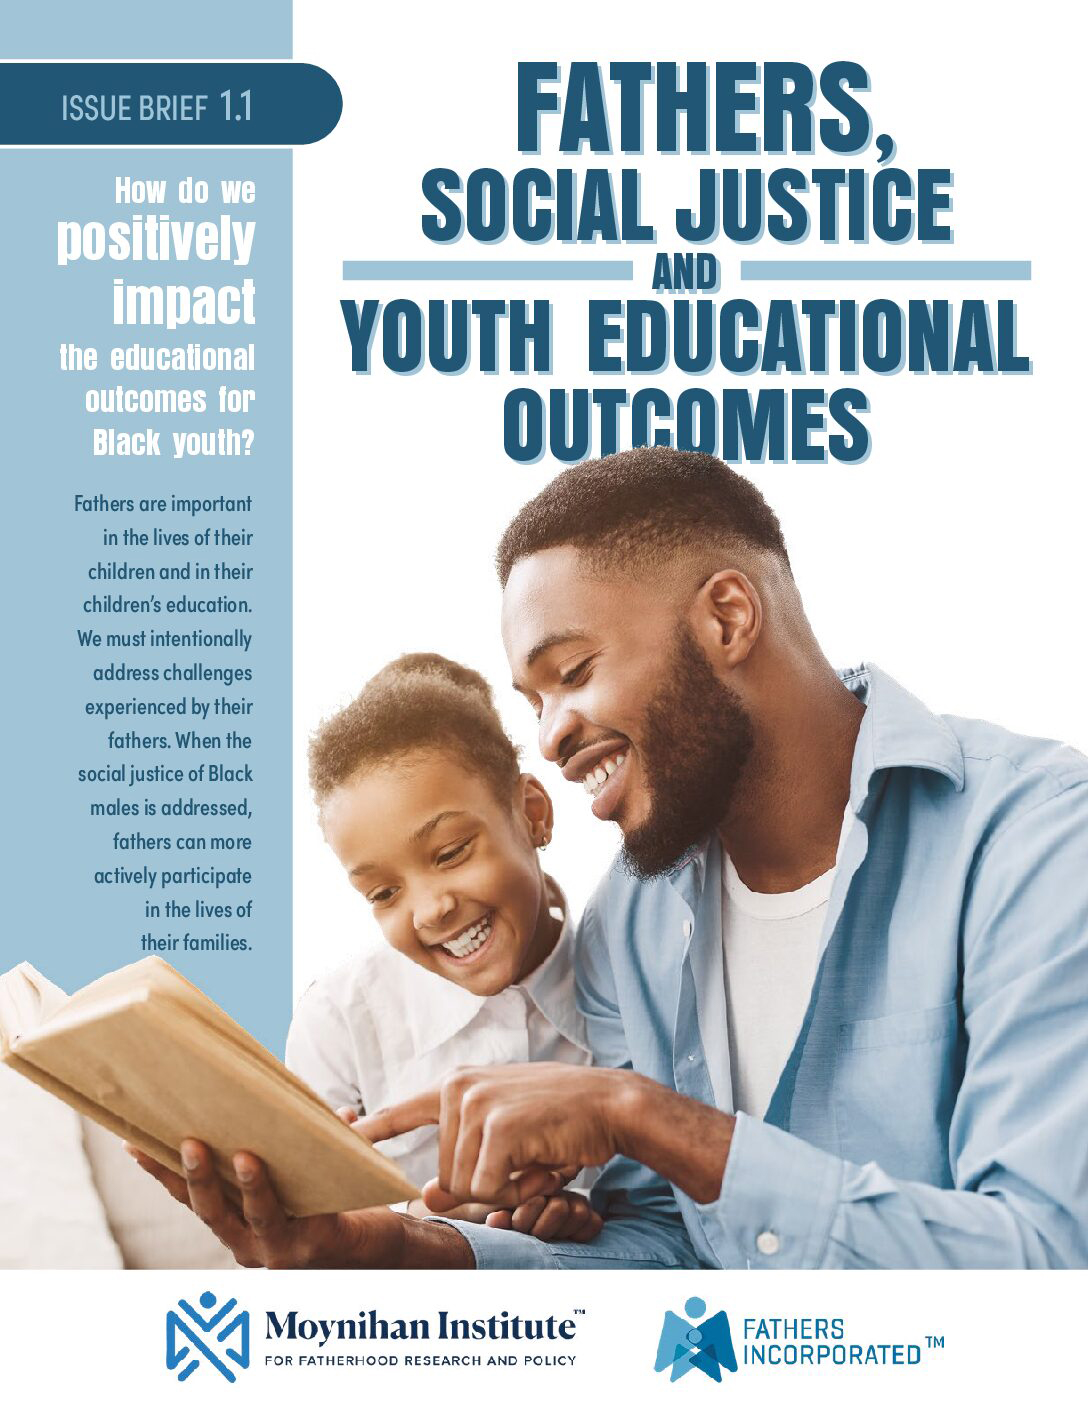 Youth Educational Outcomes